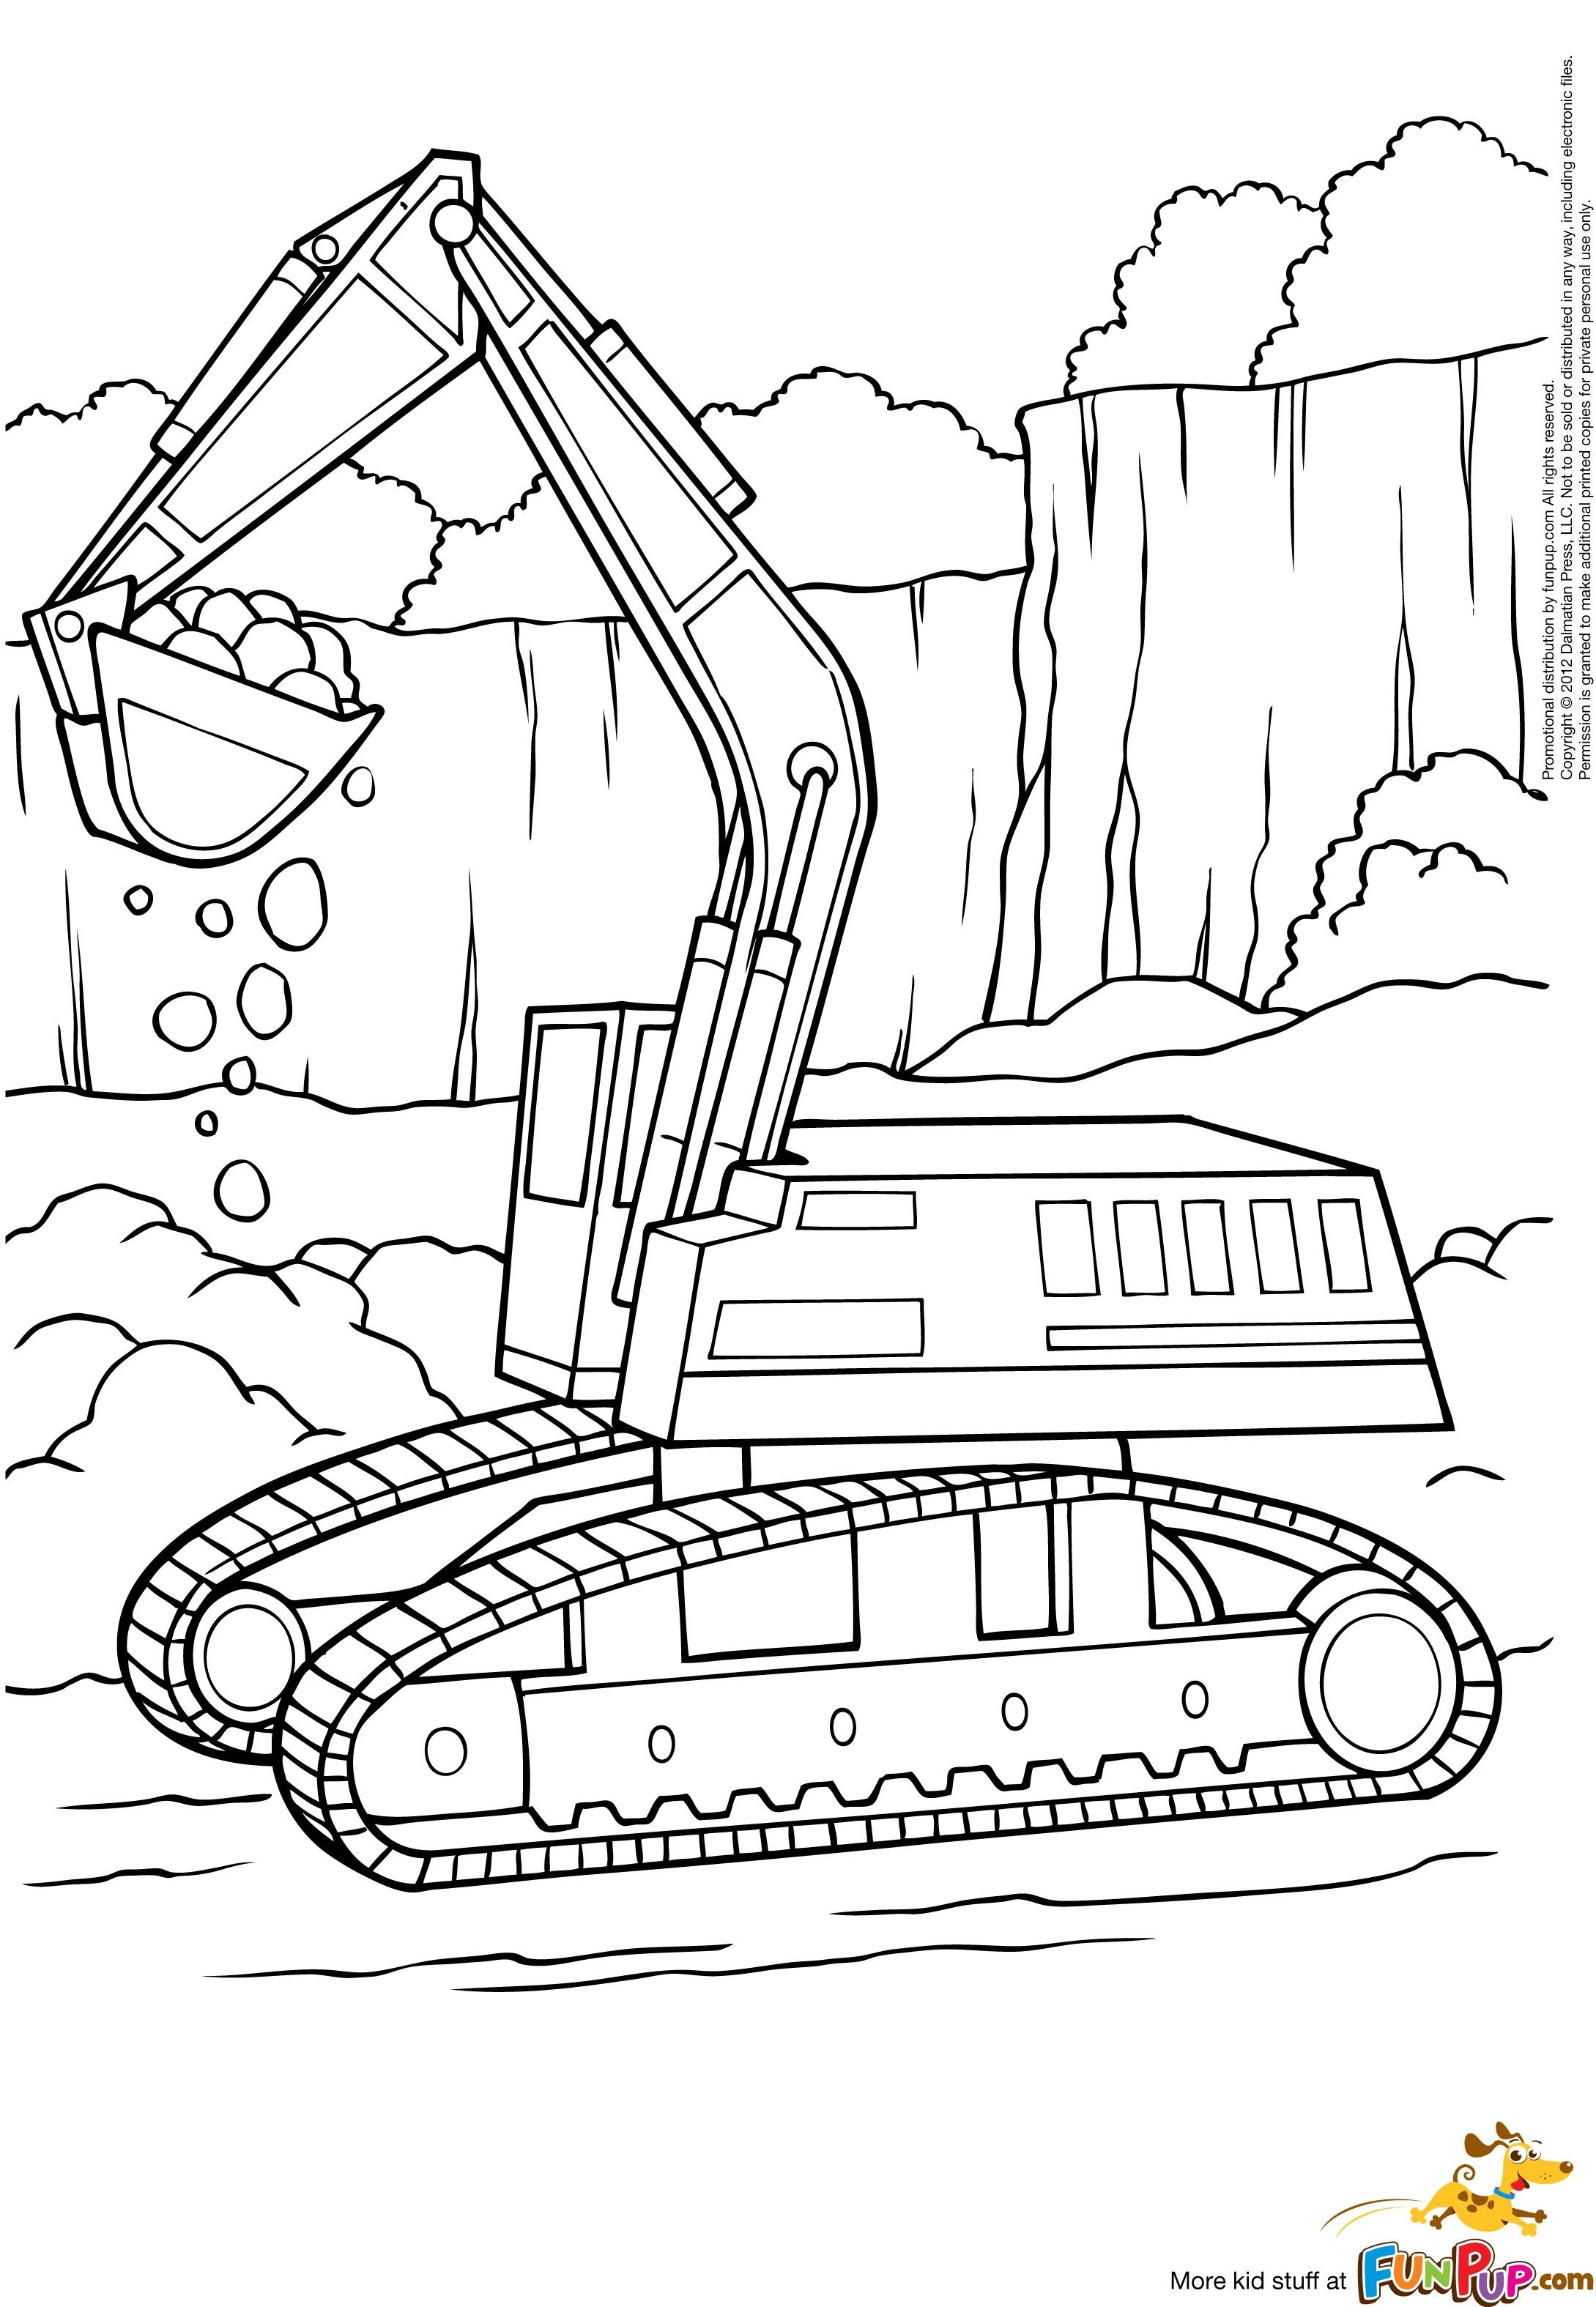 Excavator Coloring Pages Printable | Cooloring.com